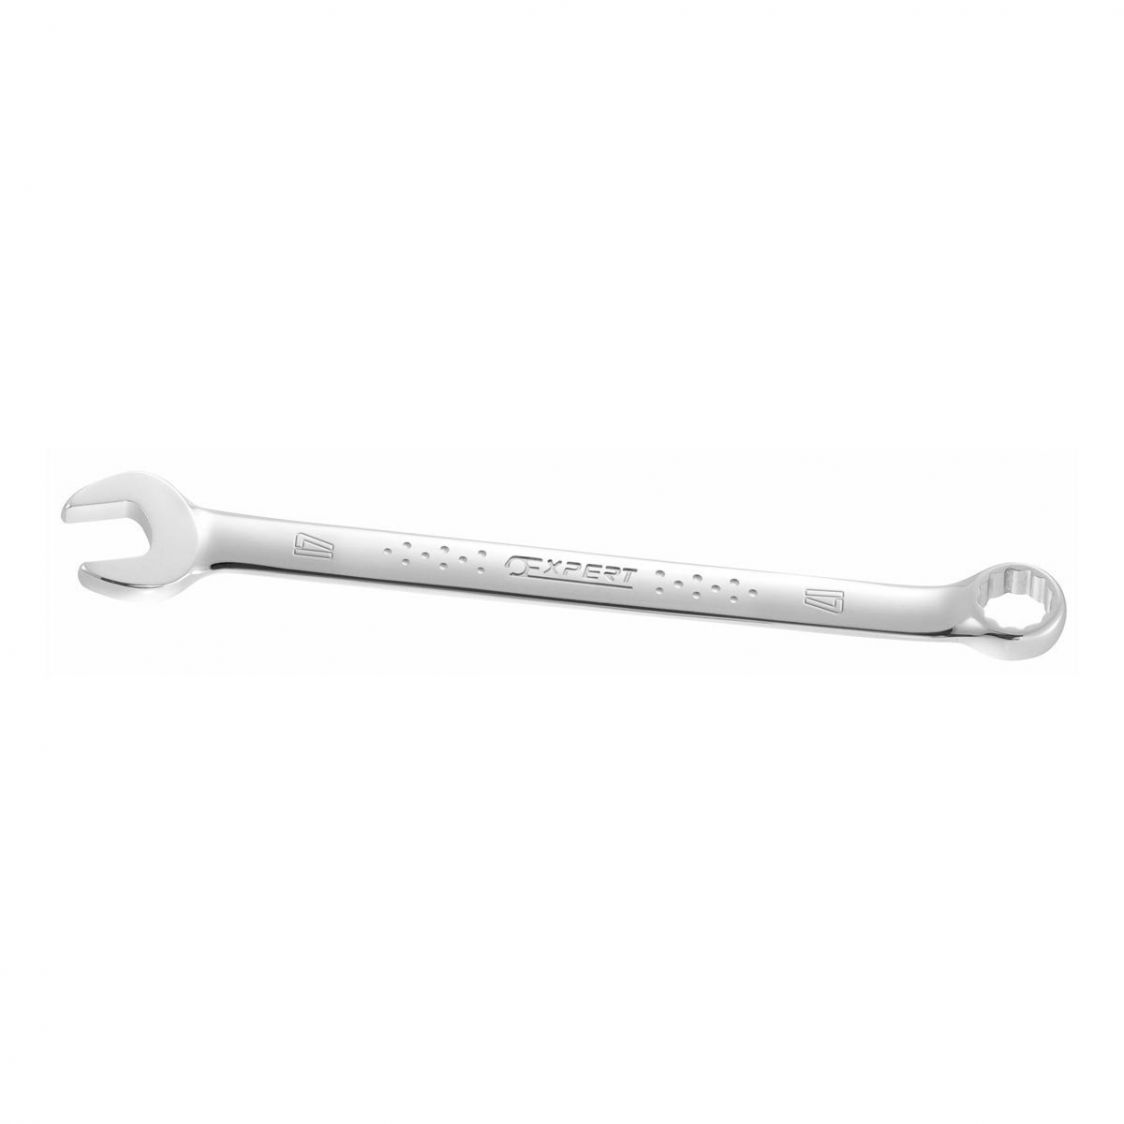 EXPERT by FACOM E110707 - 14mm Metric Long Combination Spanner